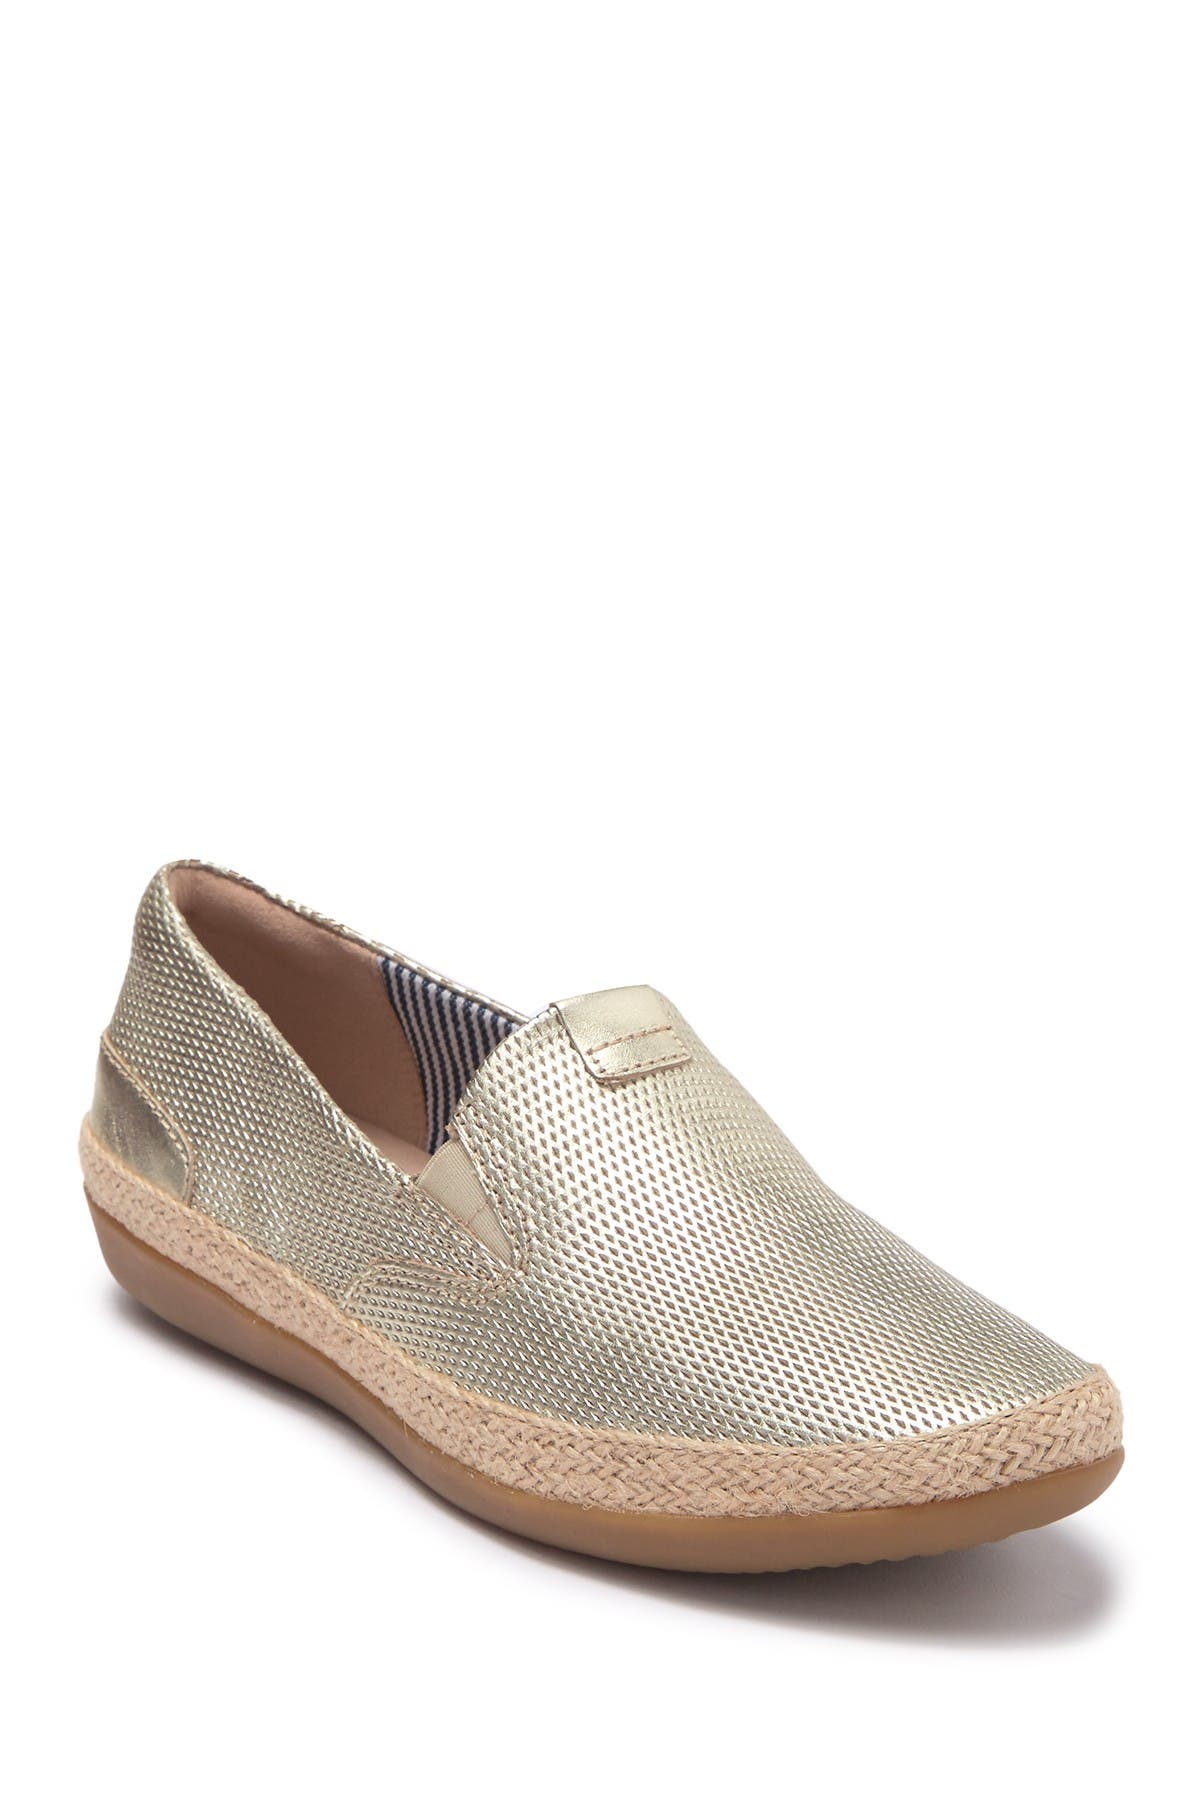 Danelly Iris Perforated Leather Slip-On 